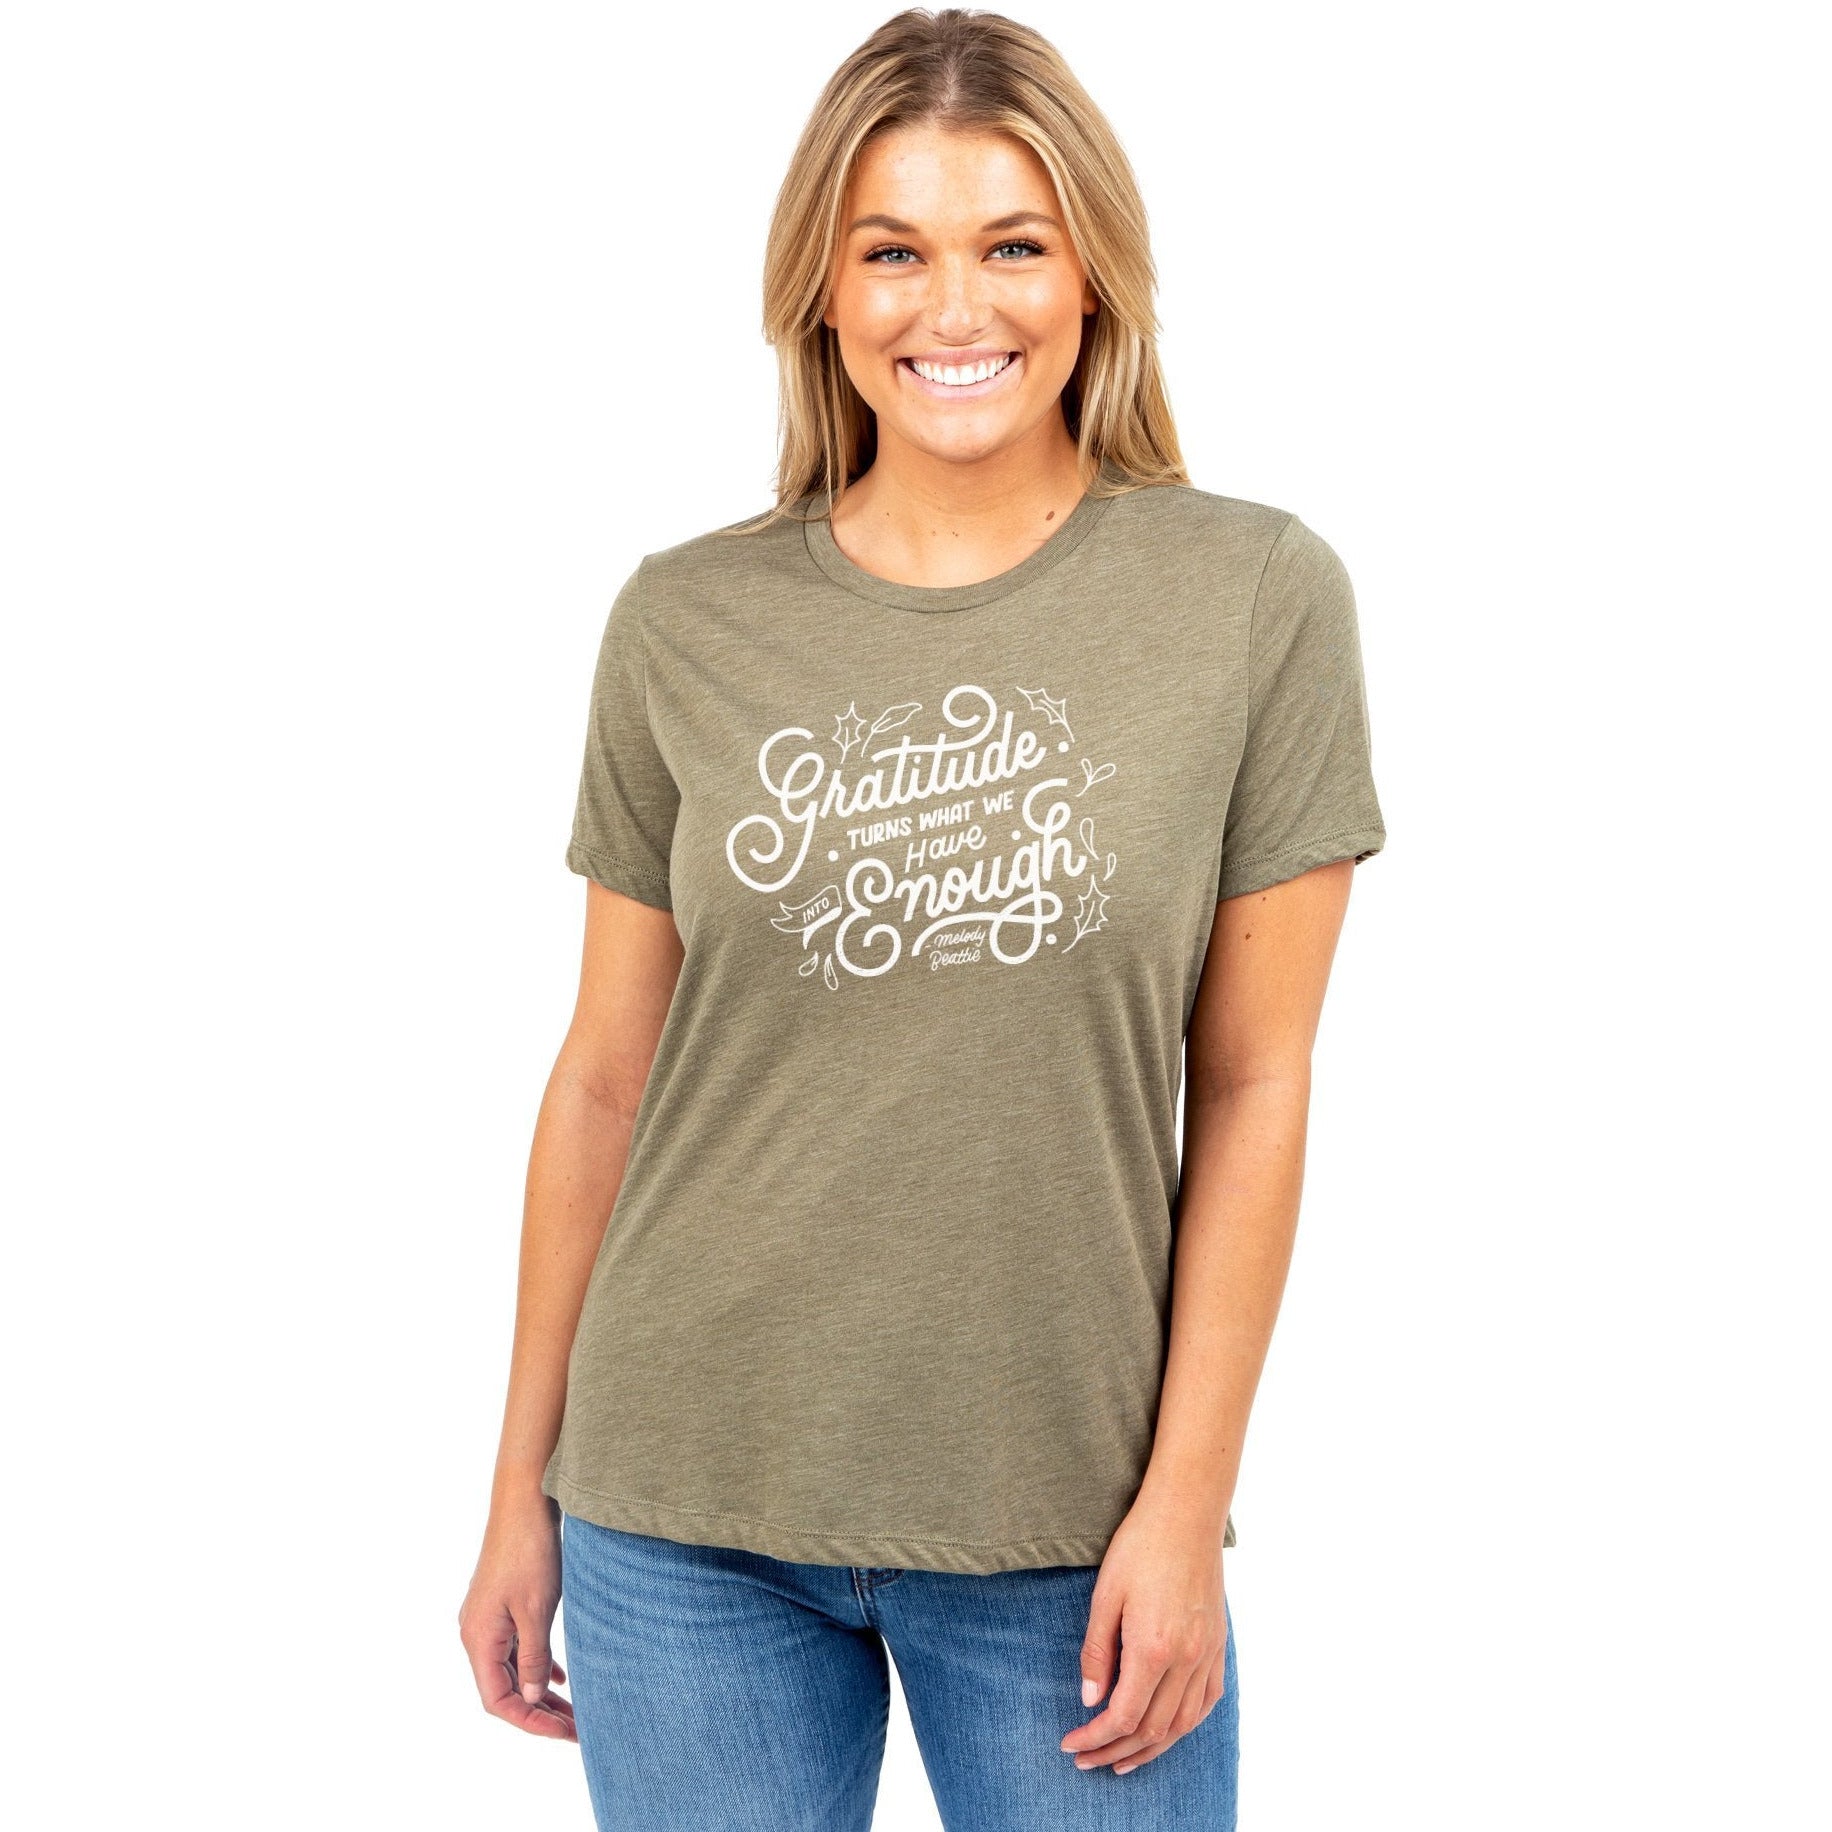 Gratitude Turns What We Have Into Enough Women's Relaxed Crewneck T-Shirt Top Tee Heather Sage Model
